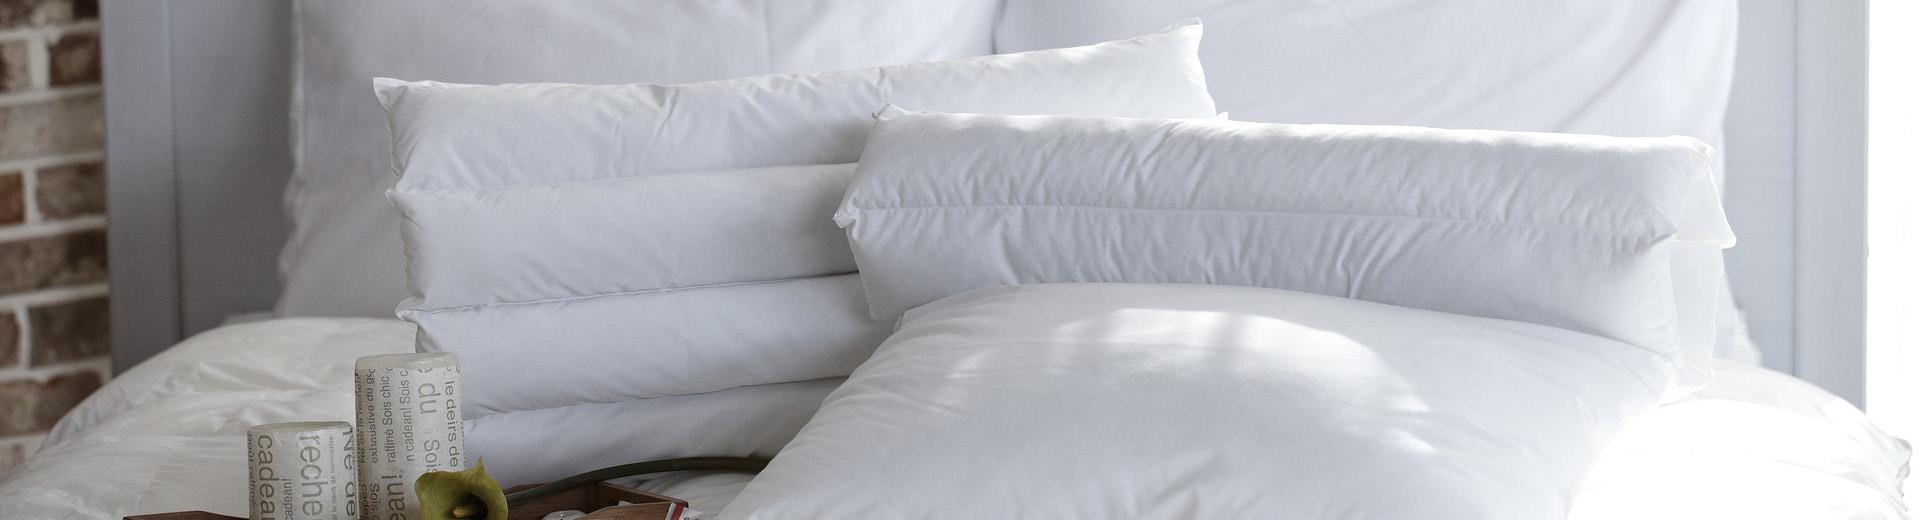 Give the maximum comfort to your sleep: choose from the Pillow menu of Hotel Goldenmile Milan the one that suits you best! This is just one of the many 4-star services of our hotel!